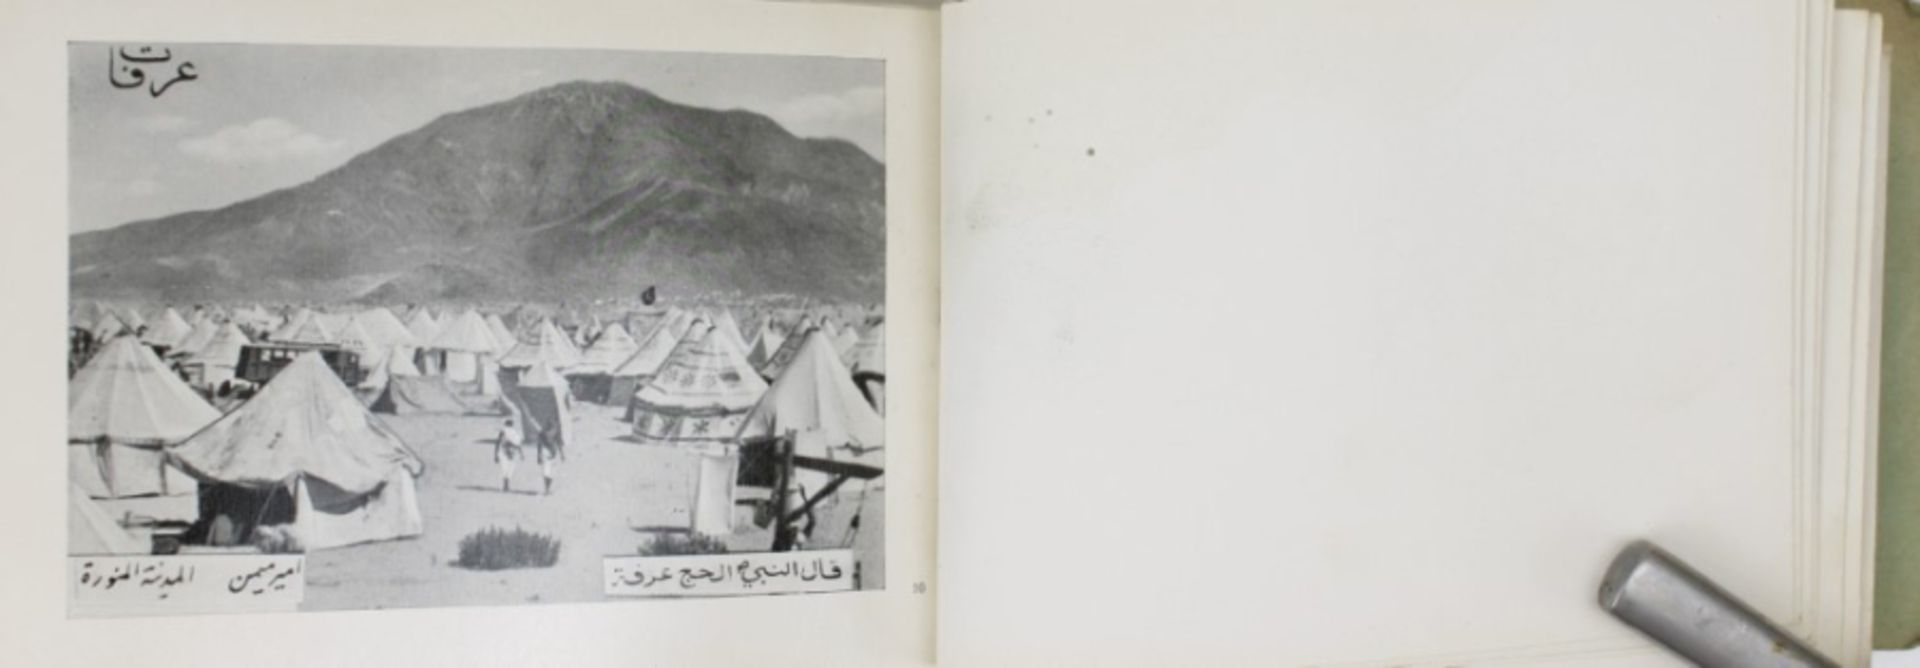 1930 Album with photographs of Mecca - Image 6 of 24